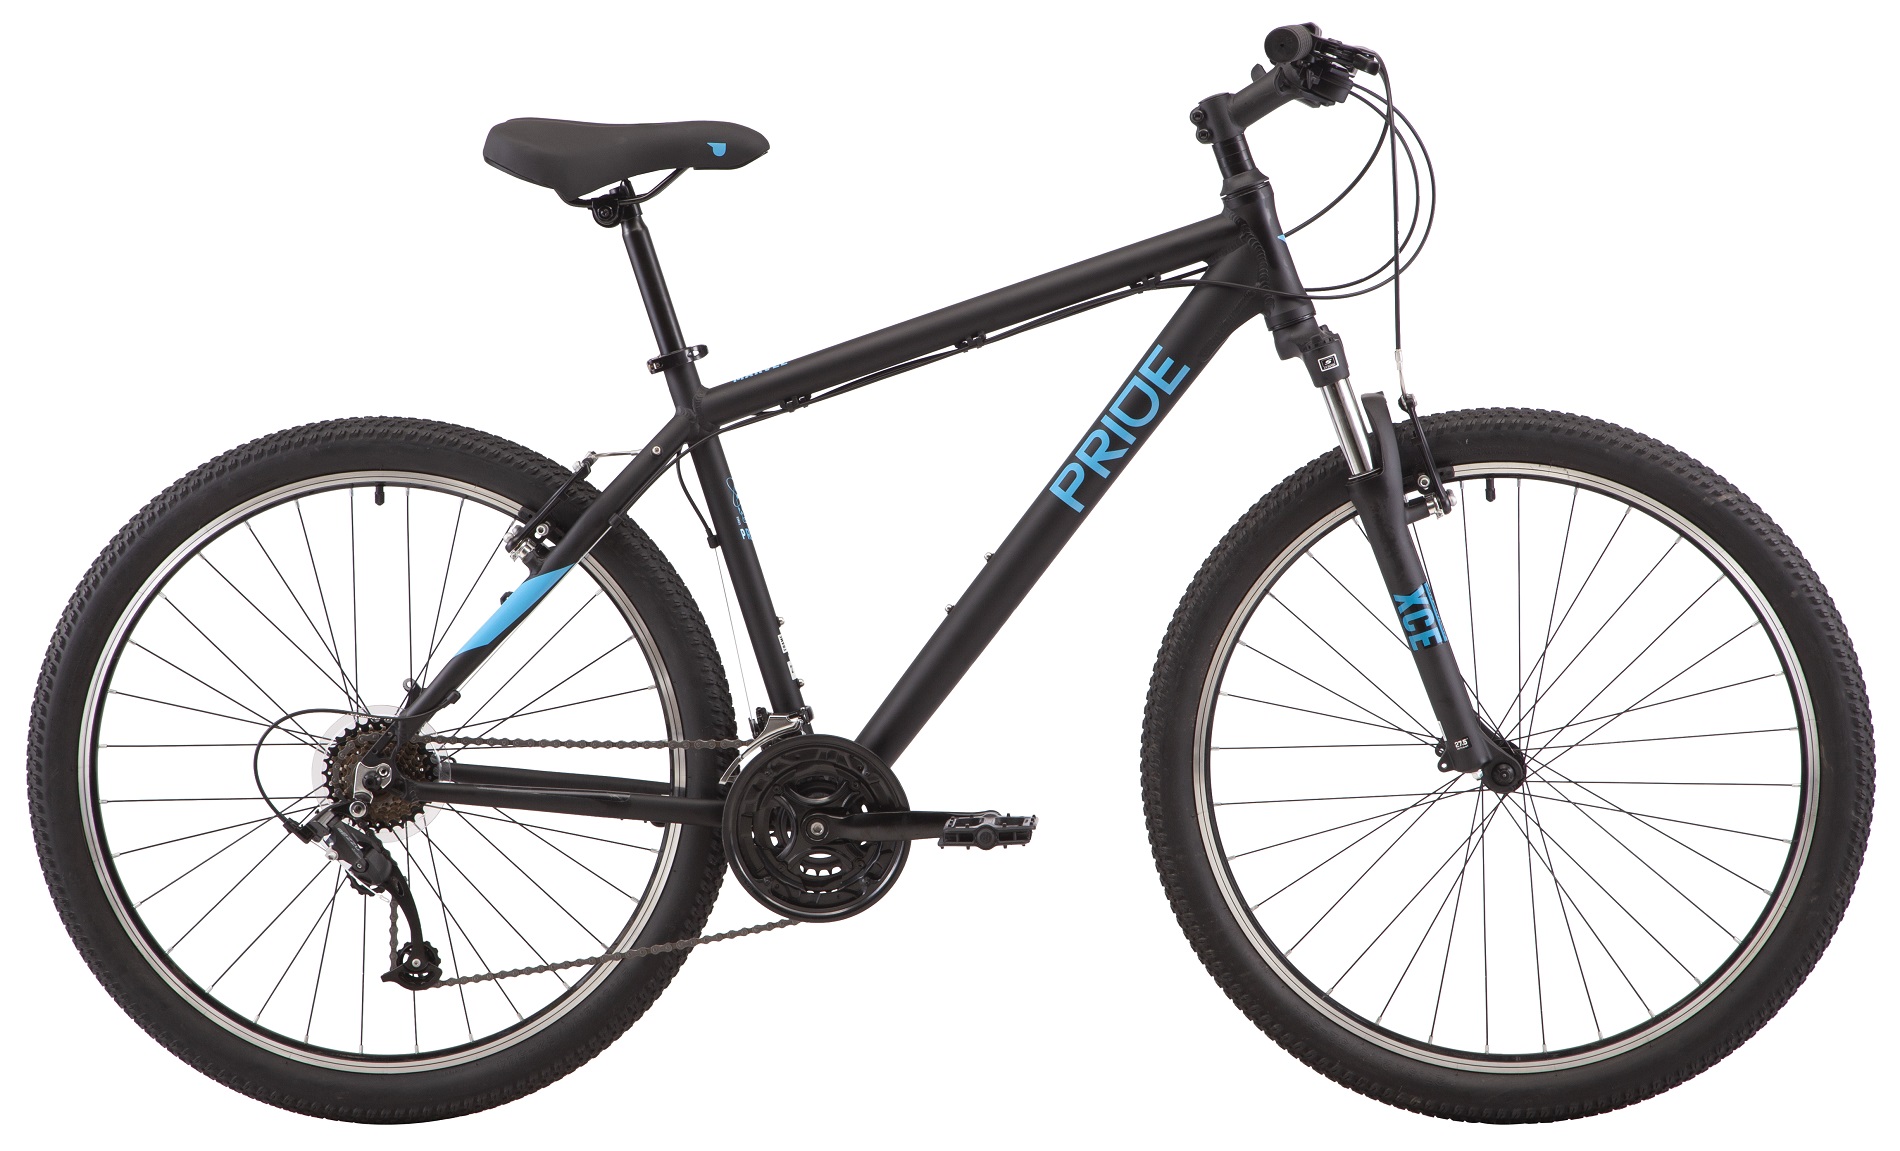 27.5" PRIDE MARVEL 7.1 frame - L 2022 Black (rear and front switches and tamnet - Microshift) Photo